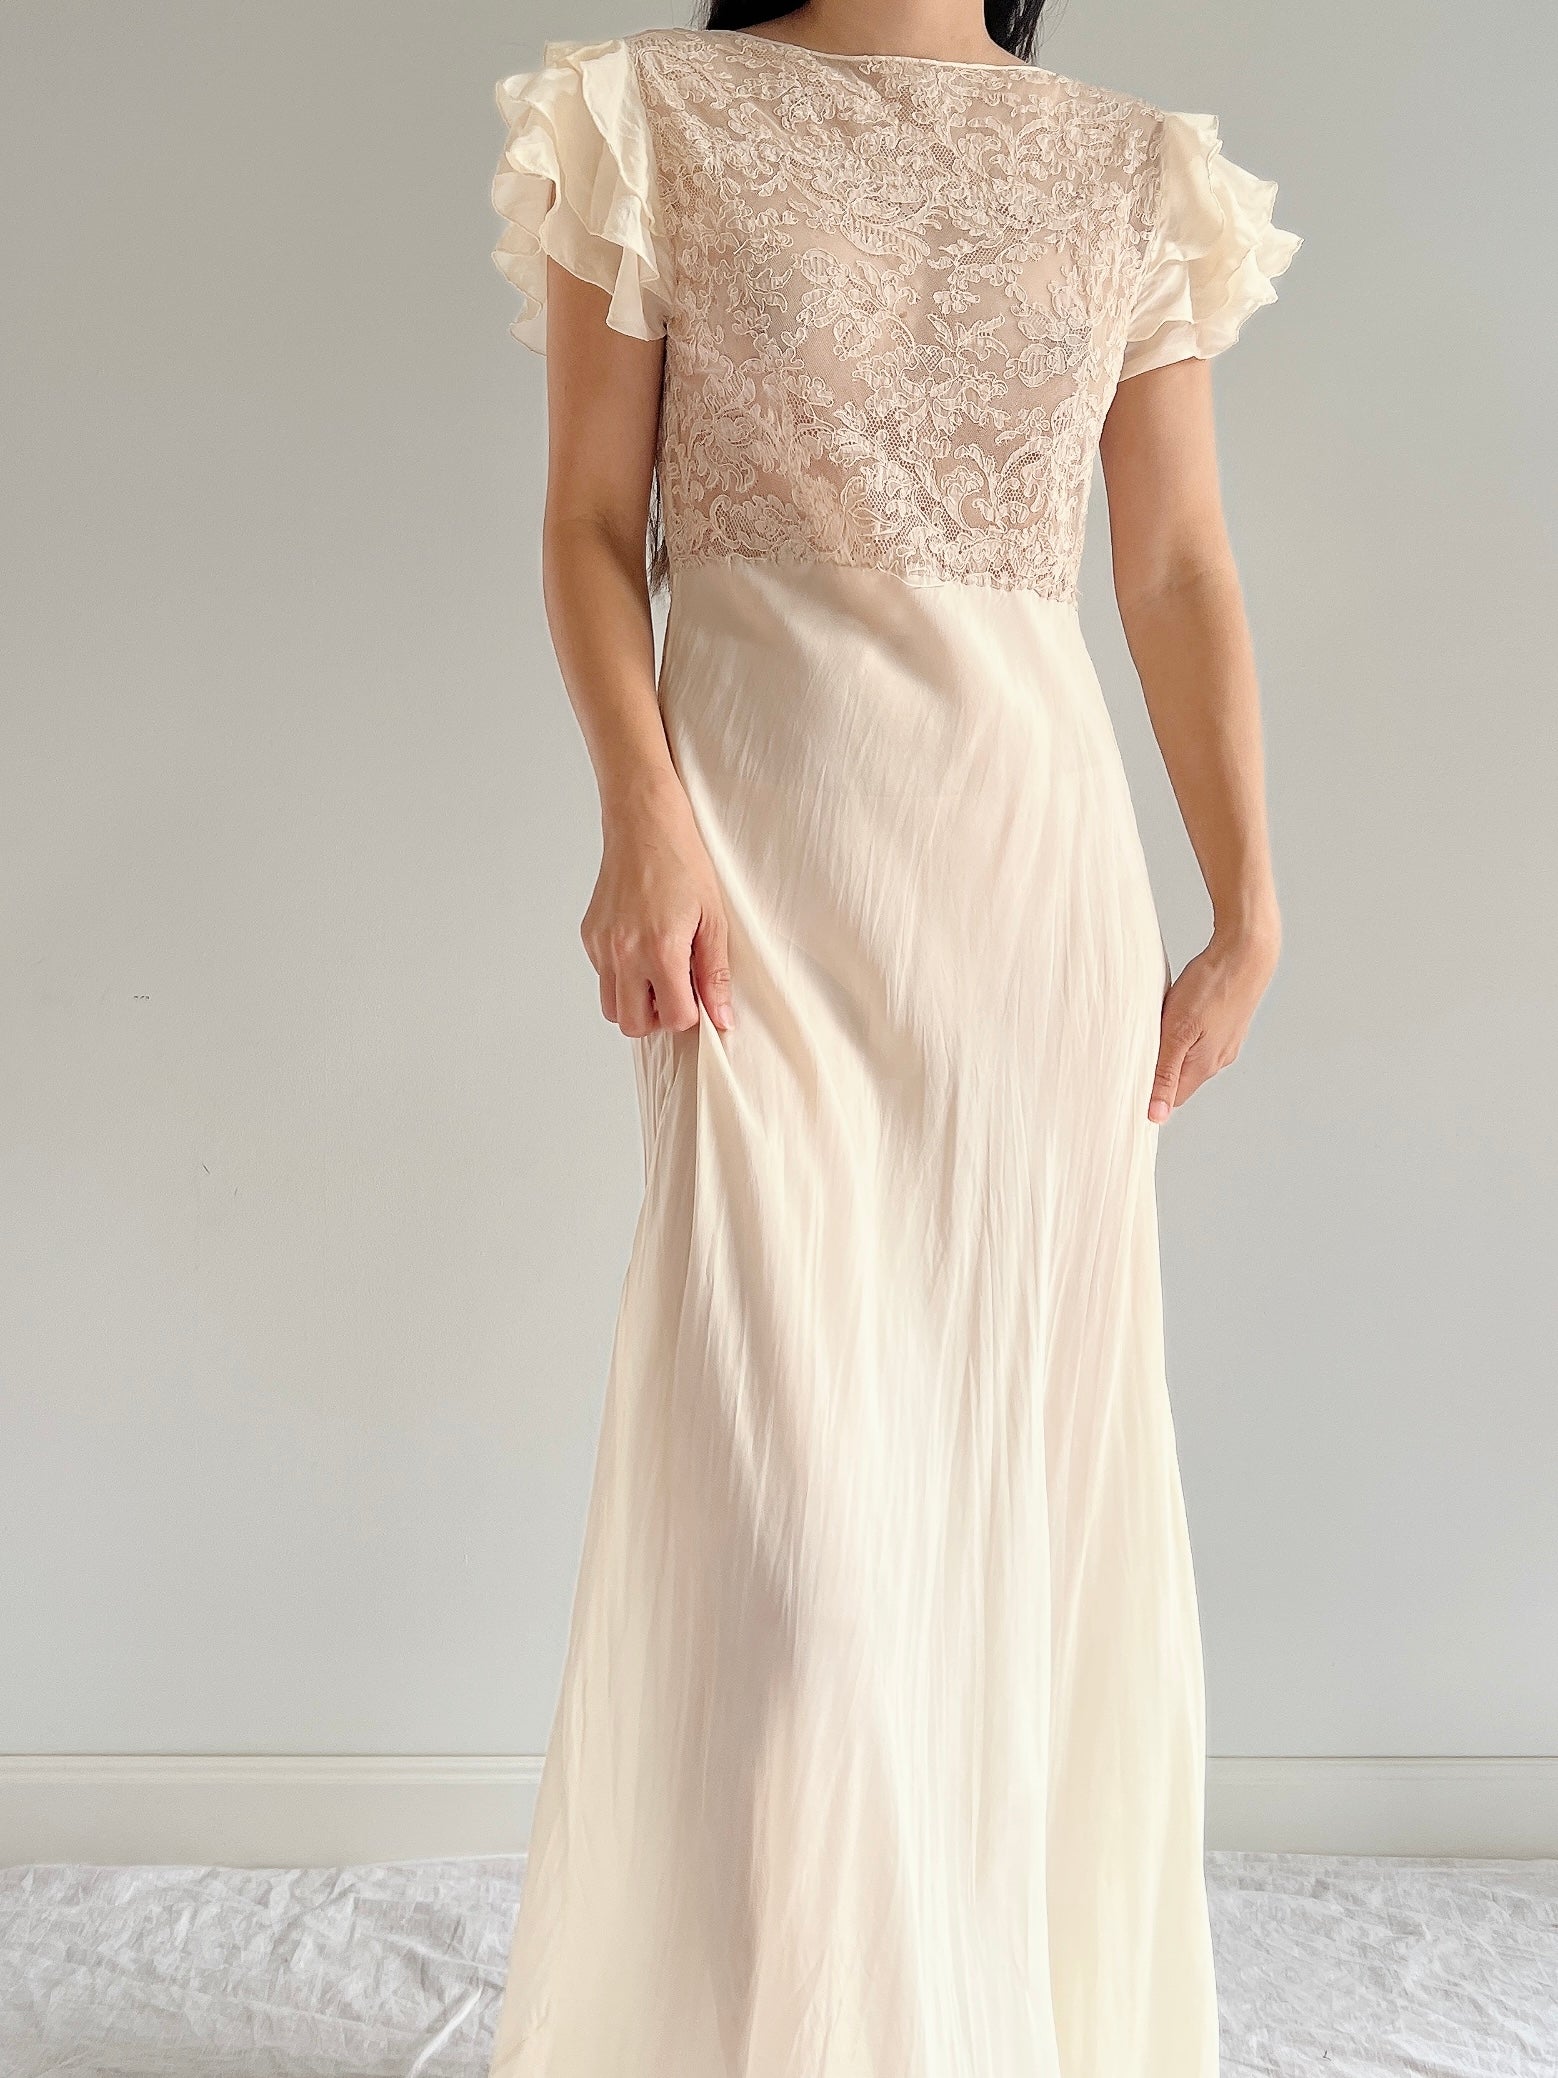 1930s Silk and Lace Dress - S